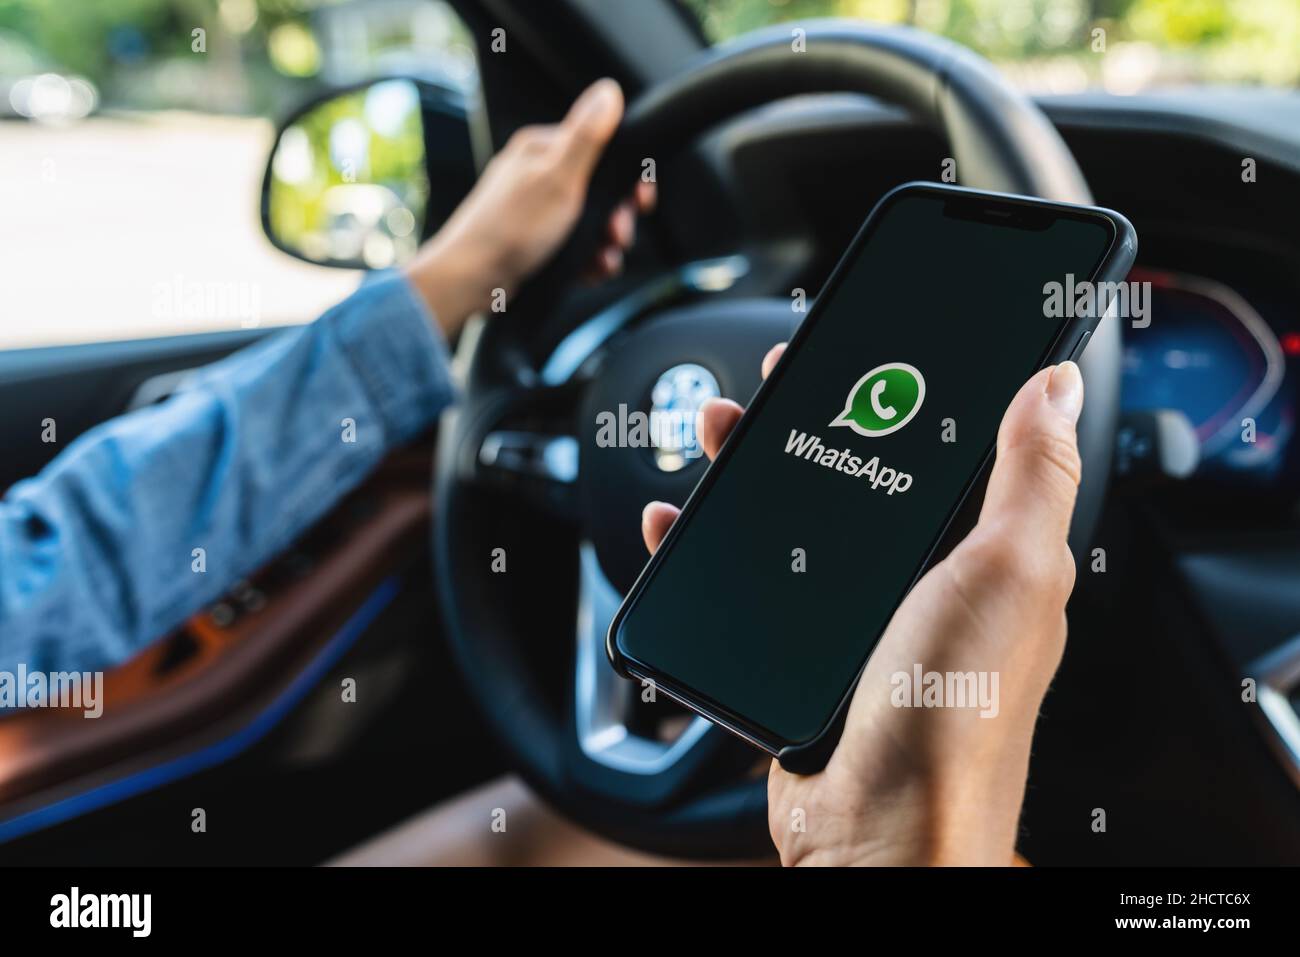 Woman hand holding iphone Xs with logo of instagram application in a car. Instagram is largest and most popular photograph social networking. Stock Photo